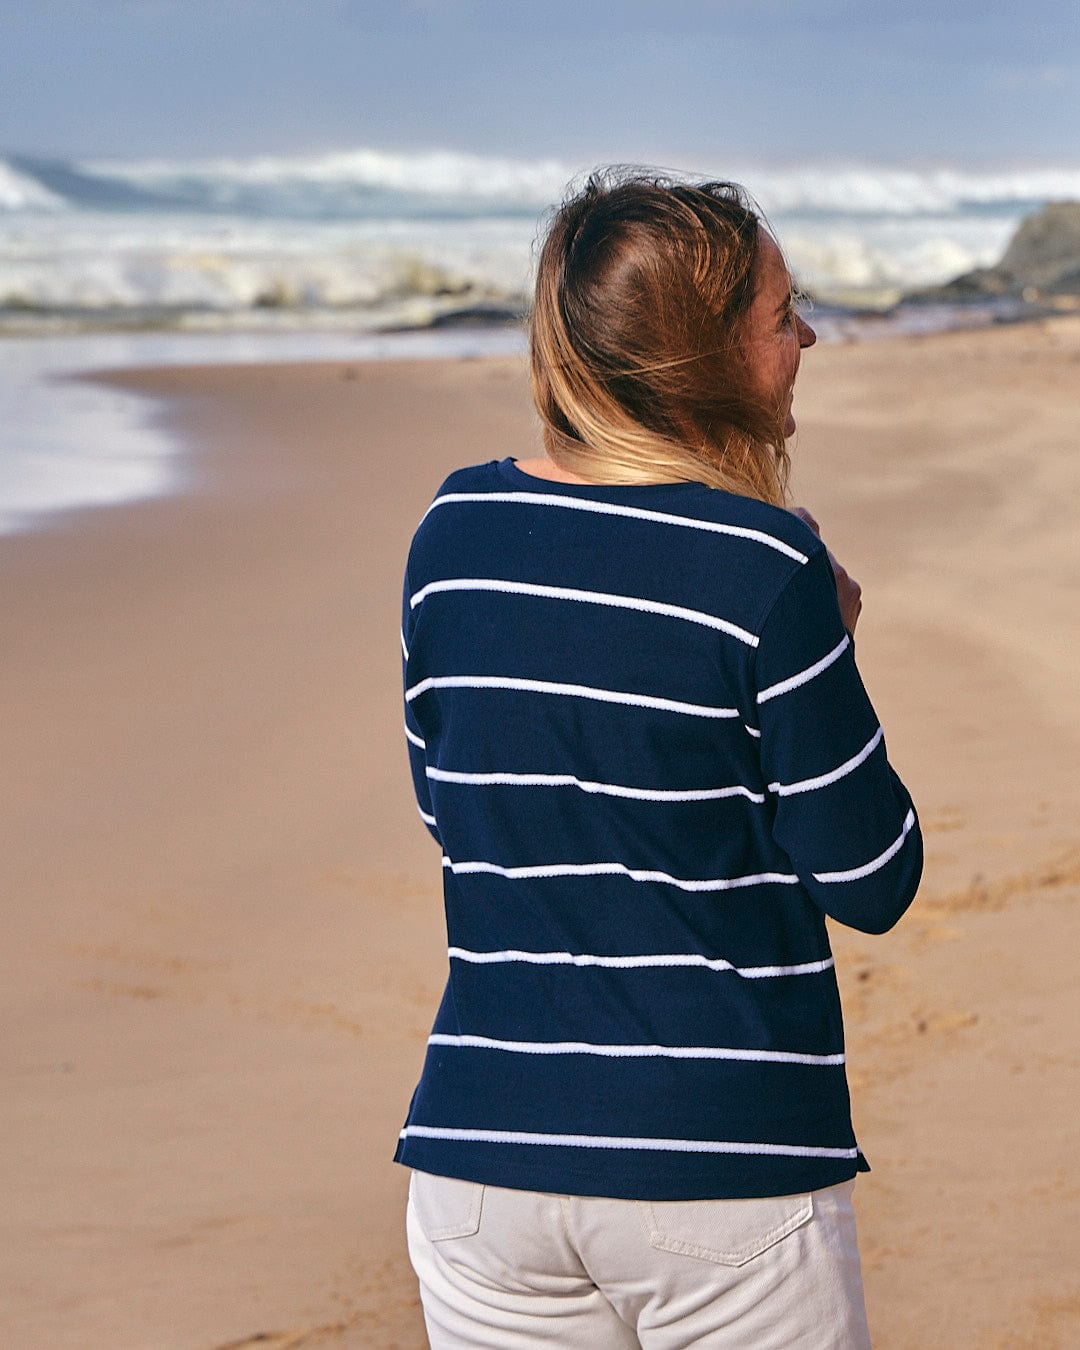 Woman in a Saltrock Hartland - Womens Striped Long Sleeve T-Shirt - Blue looking out at the ocean on a sandy beach.